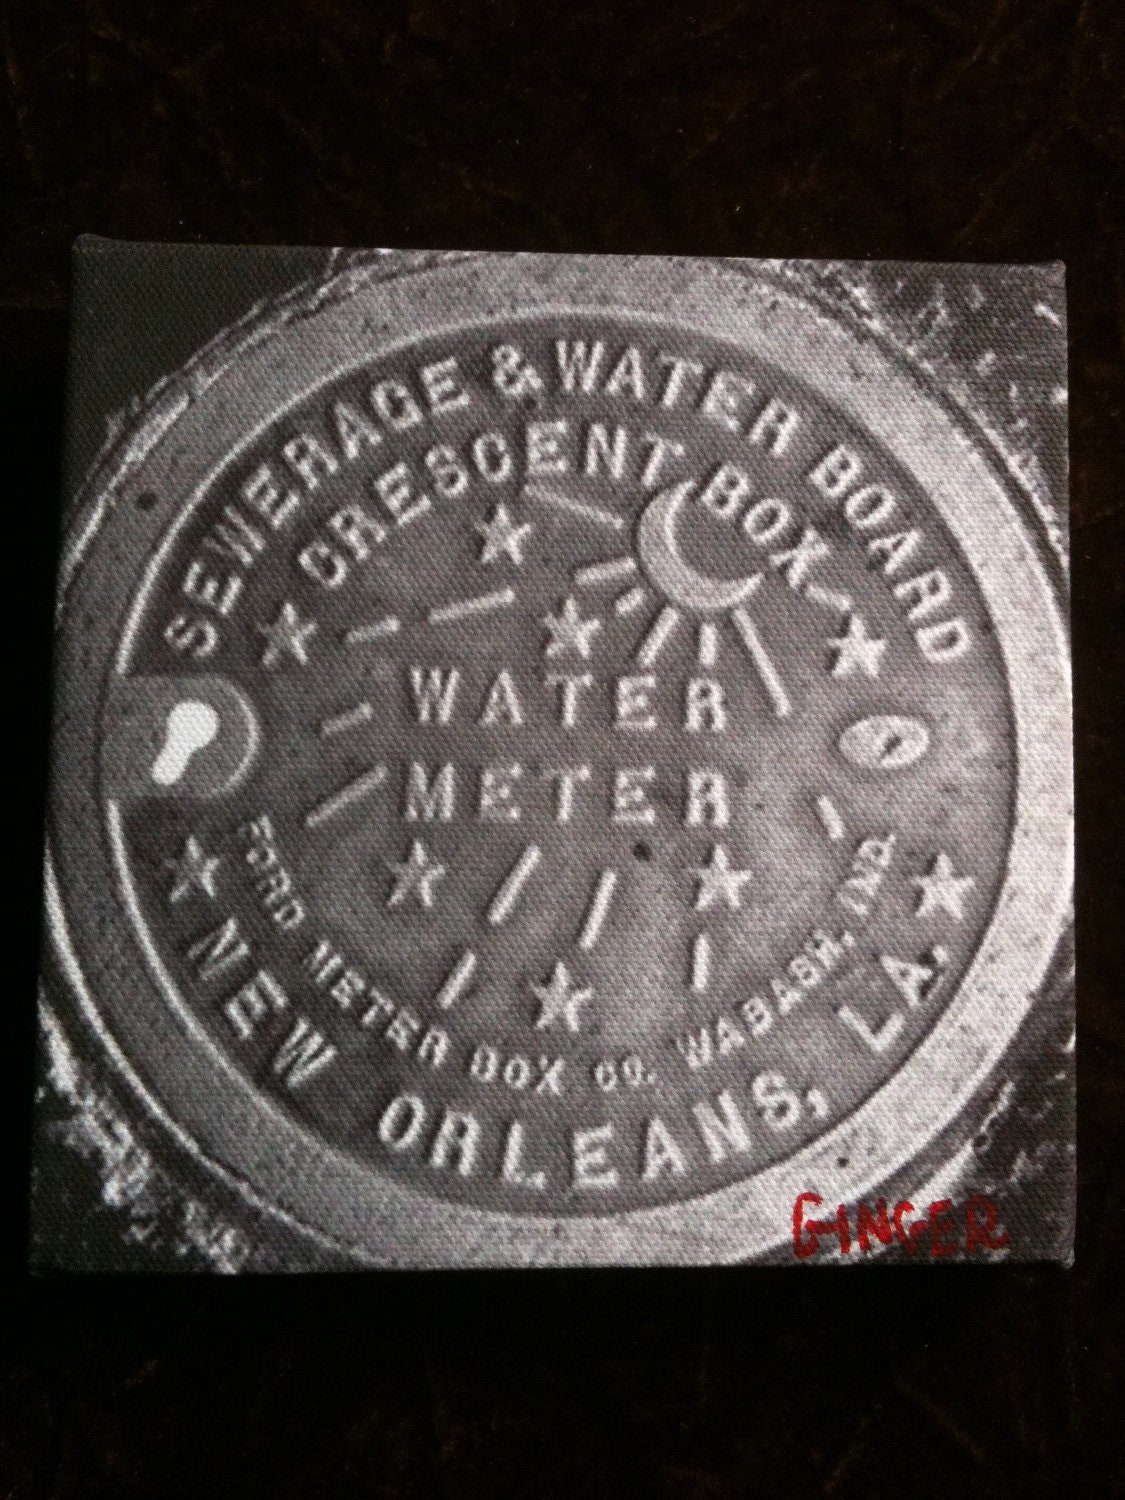 New Orleans Water Meter Painting by French Quarter Artist